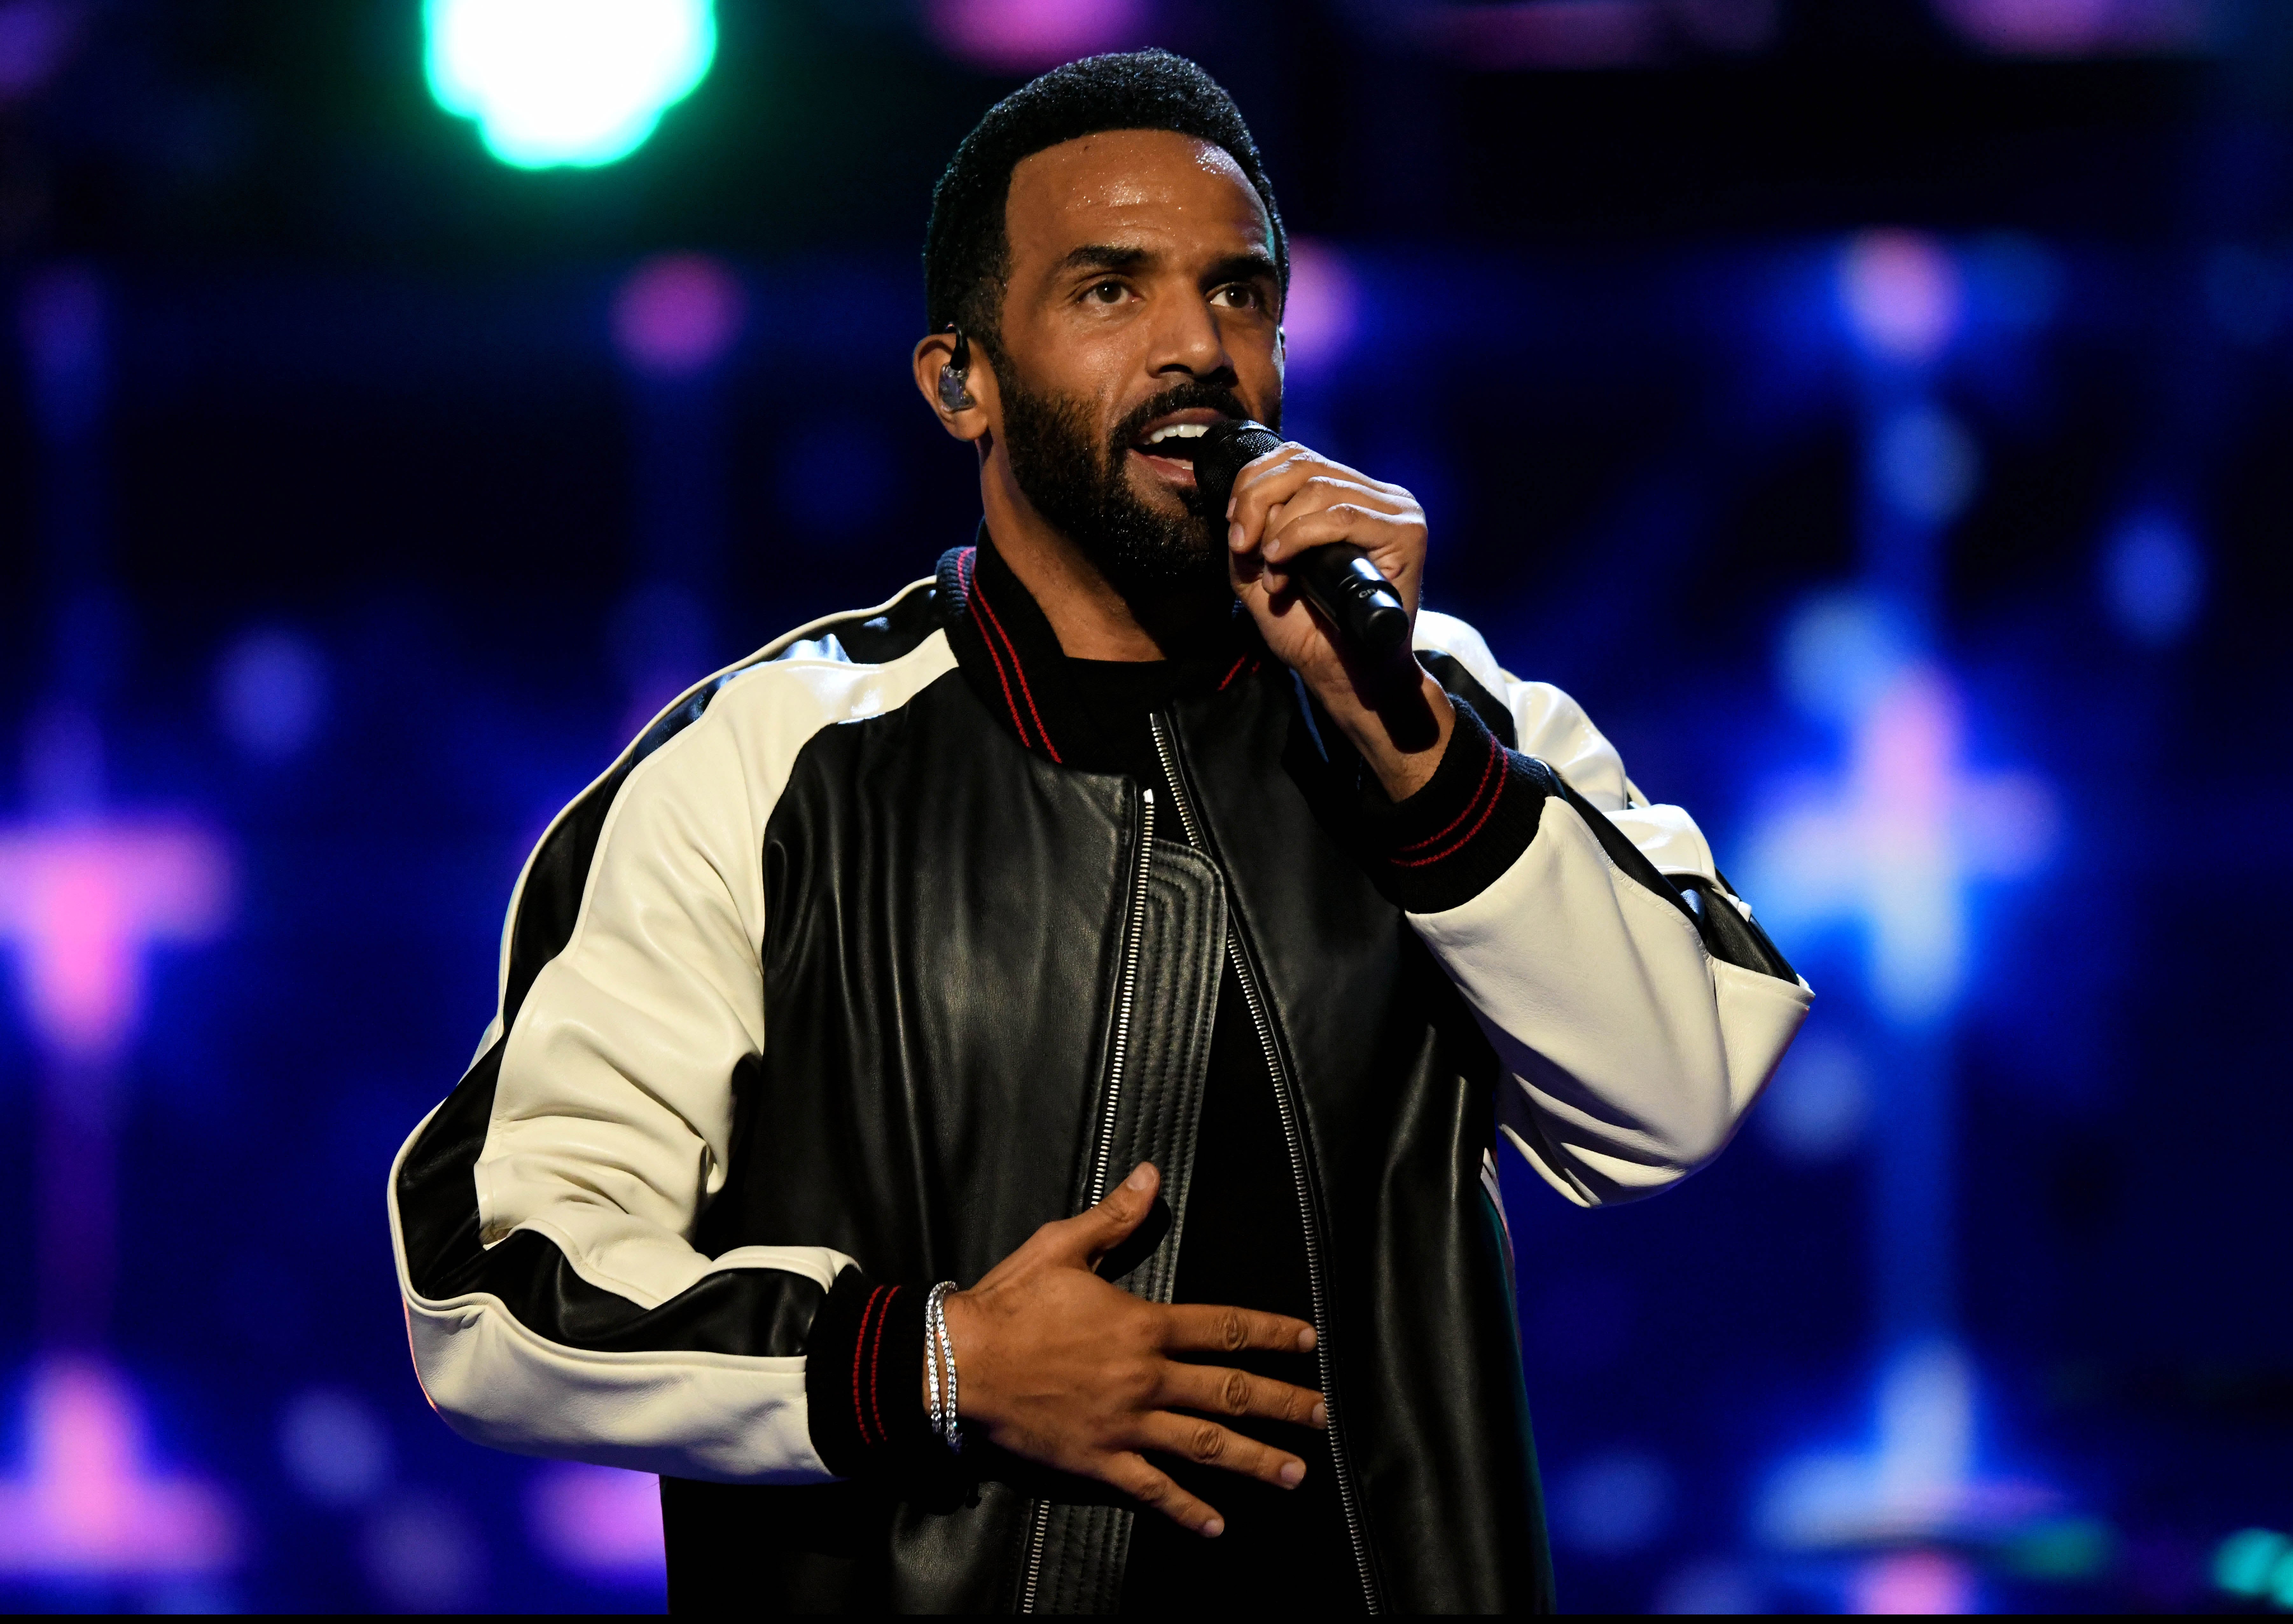 Craig David performs at a star-studded concert to celebrate the Queen's 92nd birthday at the Royal Albert Hall on April 21, 2018